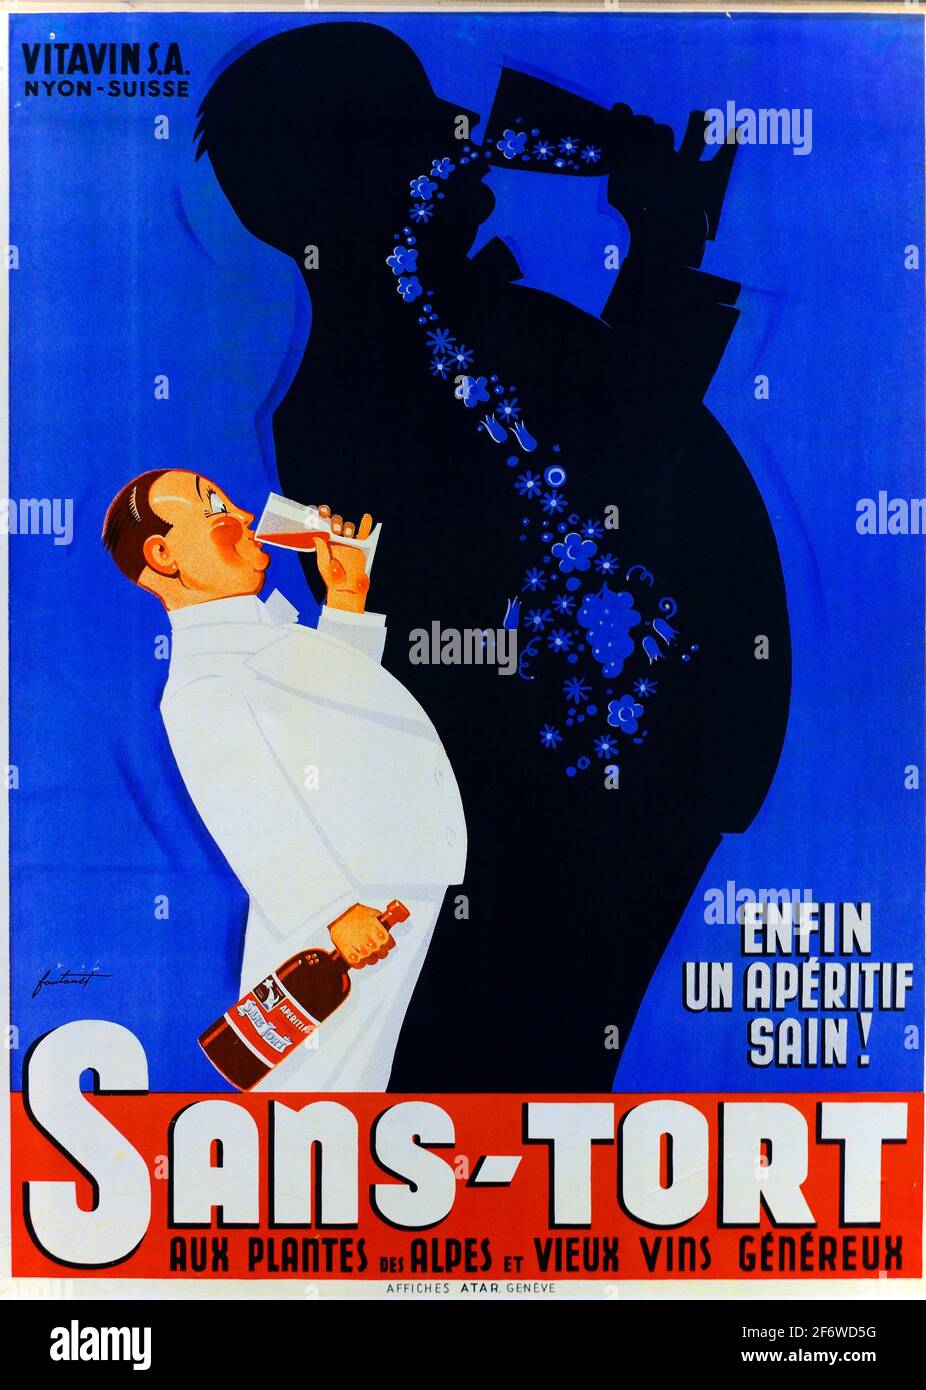 Vintage poster 'Sans-tort' from around 1937 by Swiss artist Noël Fontanet ' finally a healthy aperitif ' promoting natural and virtuous aperitif Stock Photo